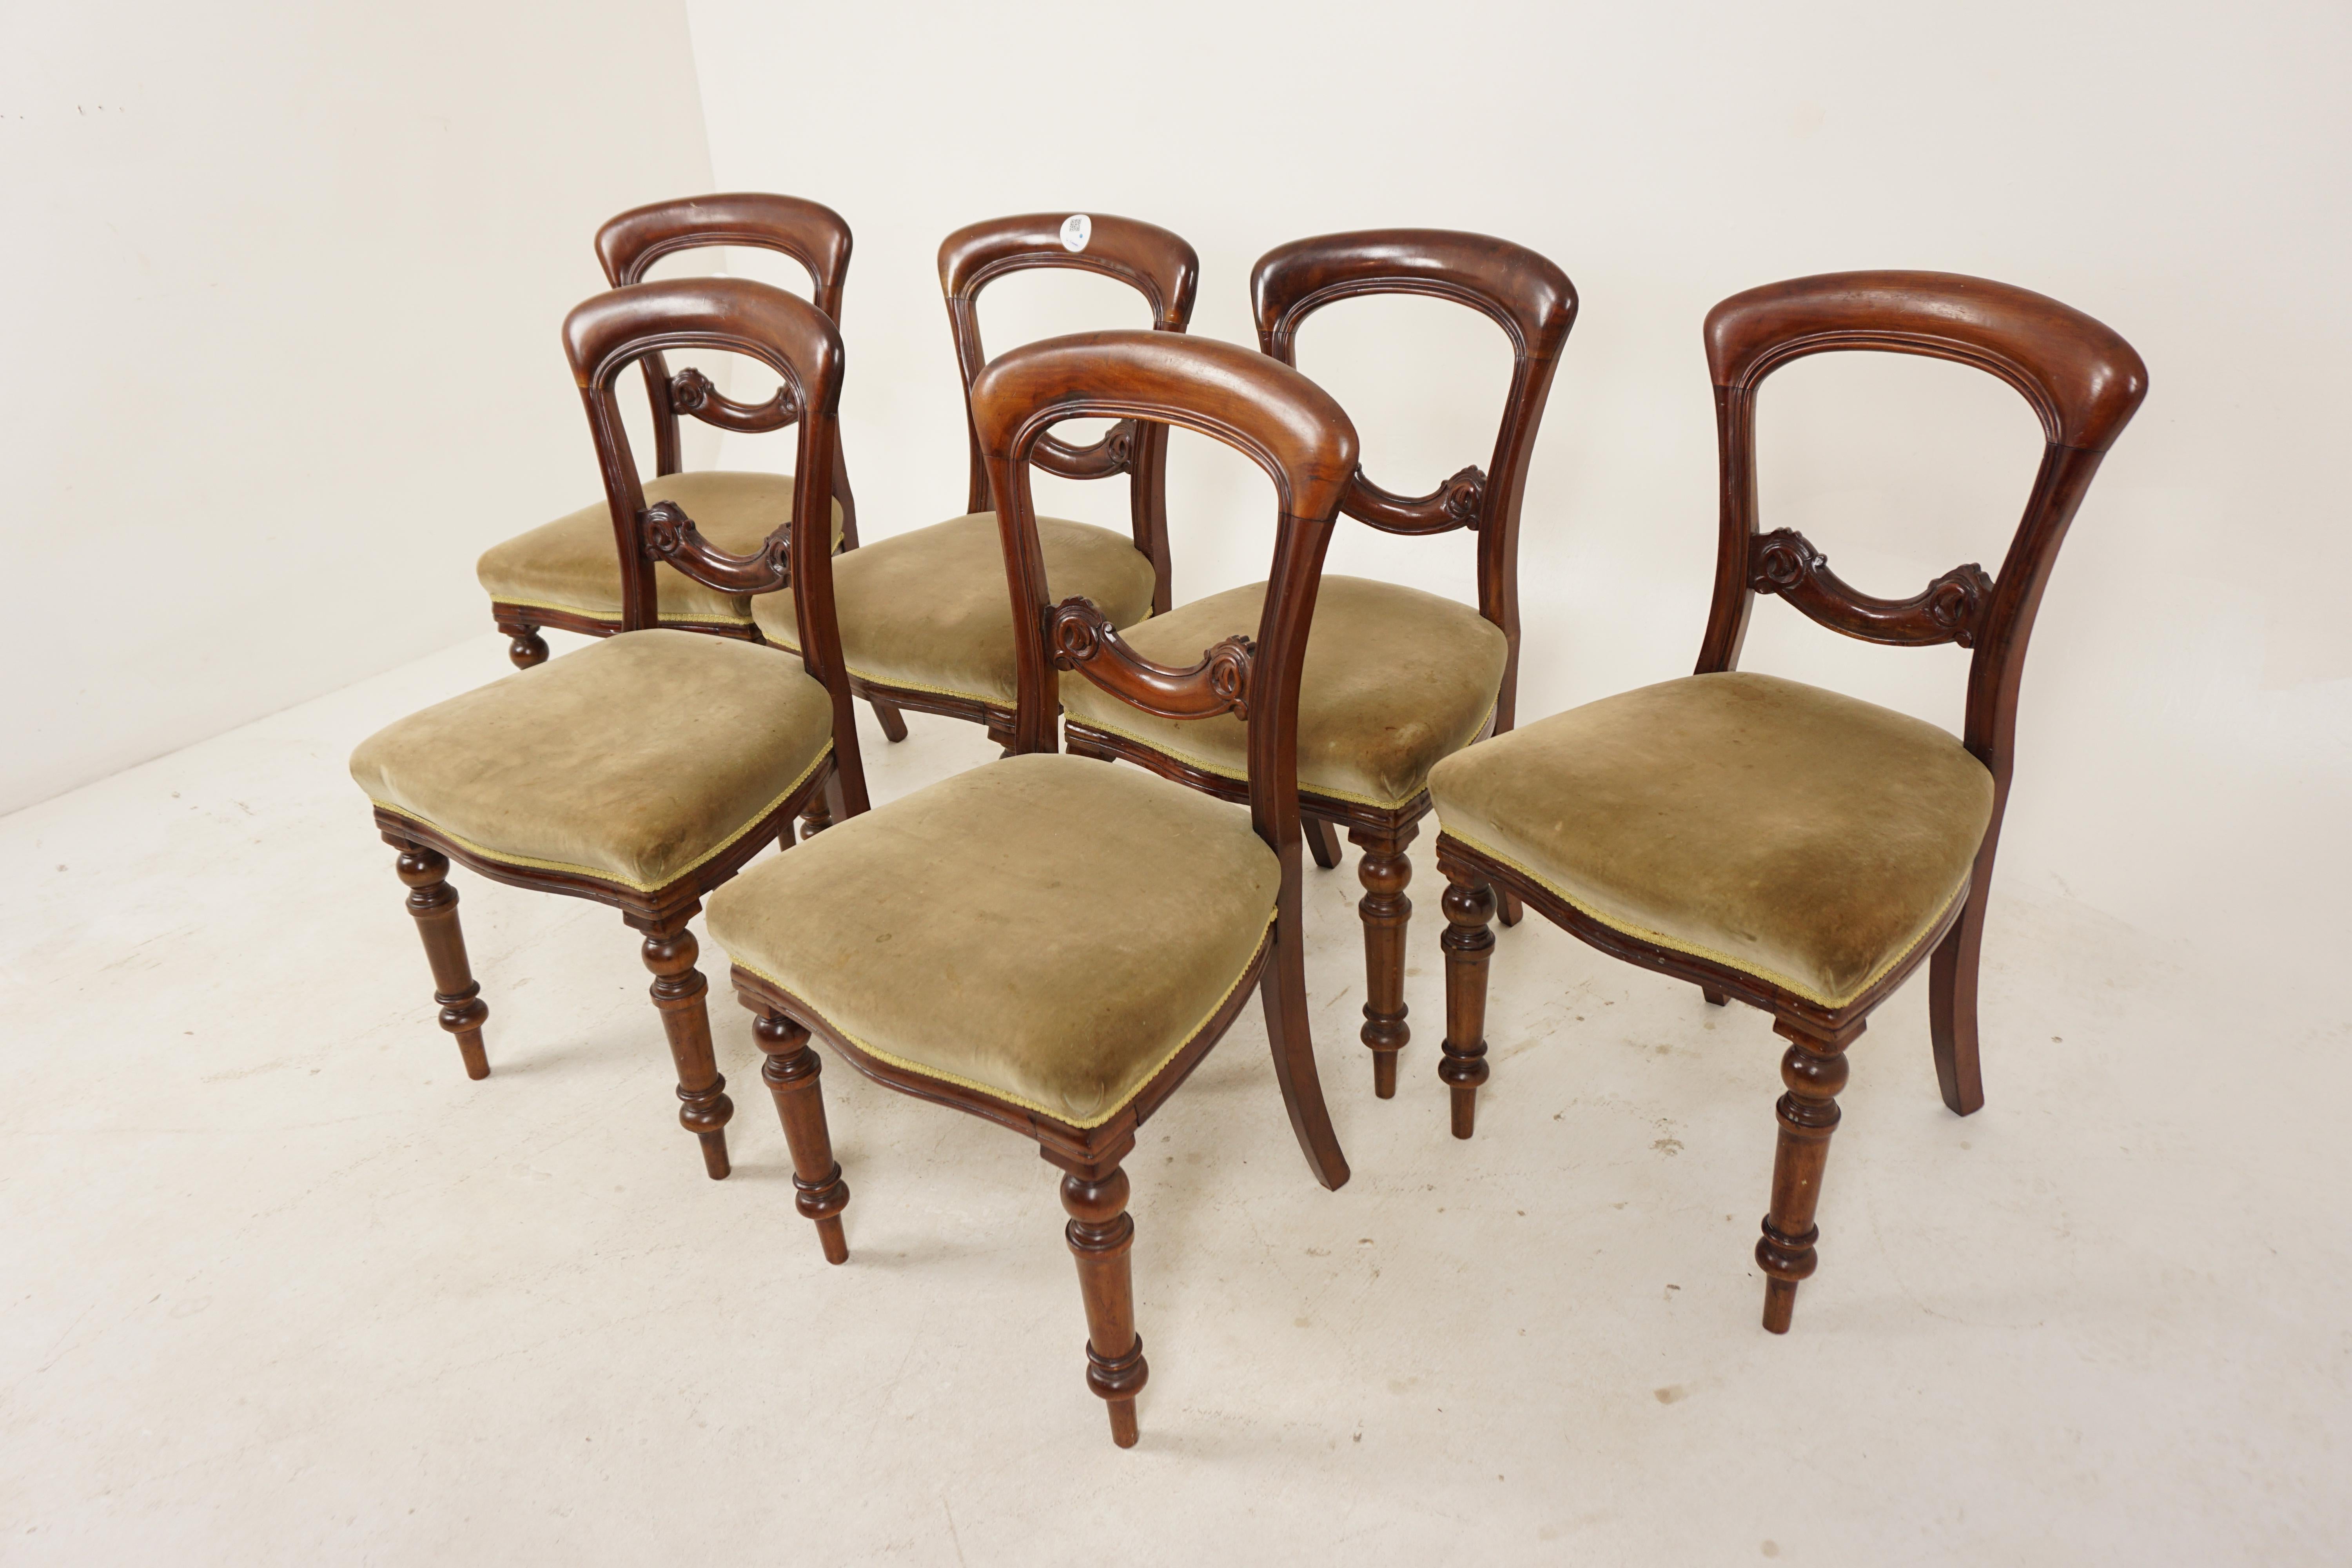 Set of 6 Victorian carved walnut upholstered dining chairs, Scotland 1880, H924.

Scotland 1880
Solid walnut
Solid finish
Curved shaped balloon open back
Carved shaped horizontal central splat
Green upholstered seat on moulded frame
Turned